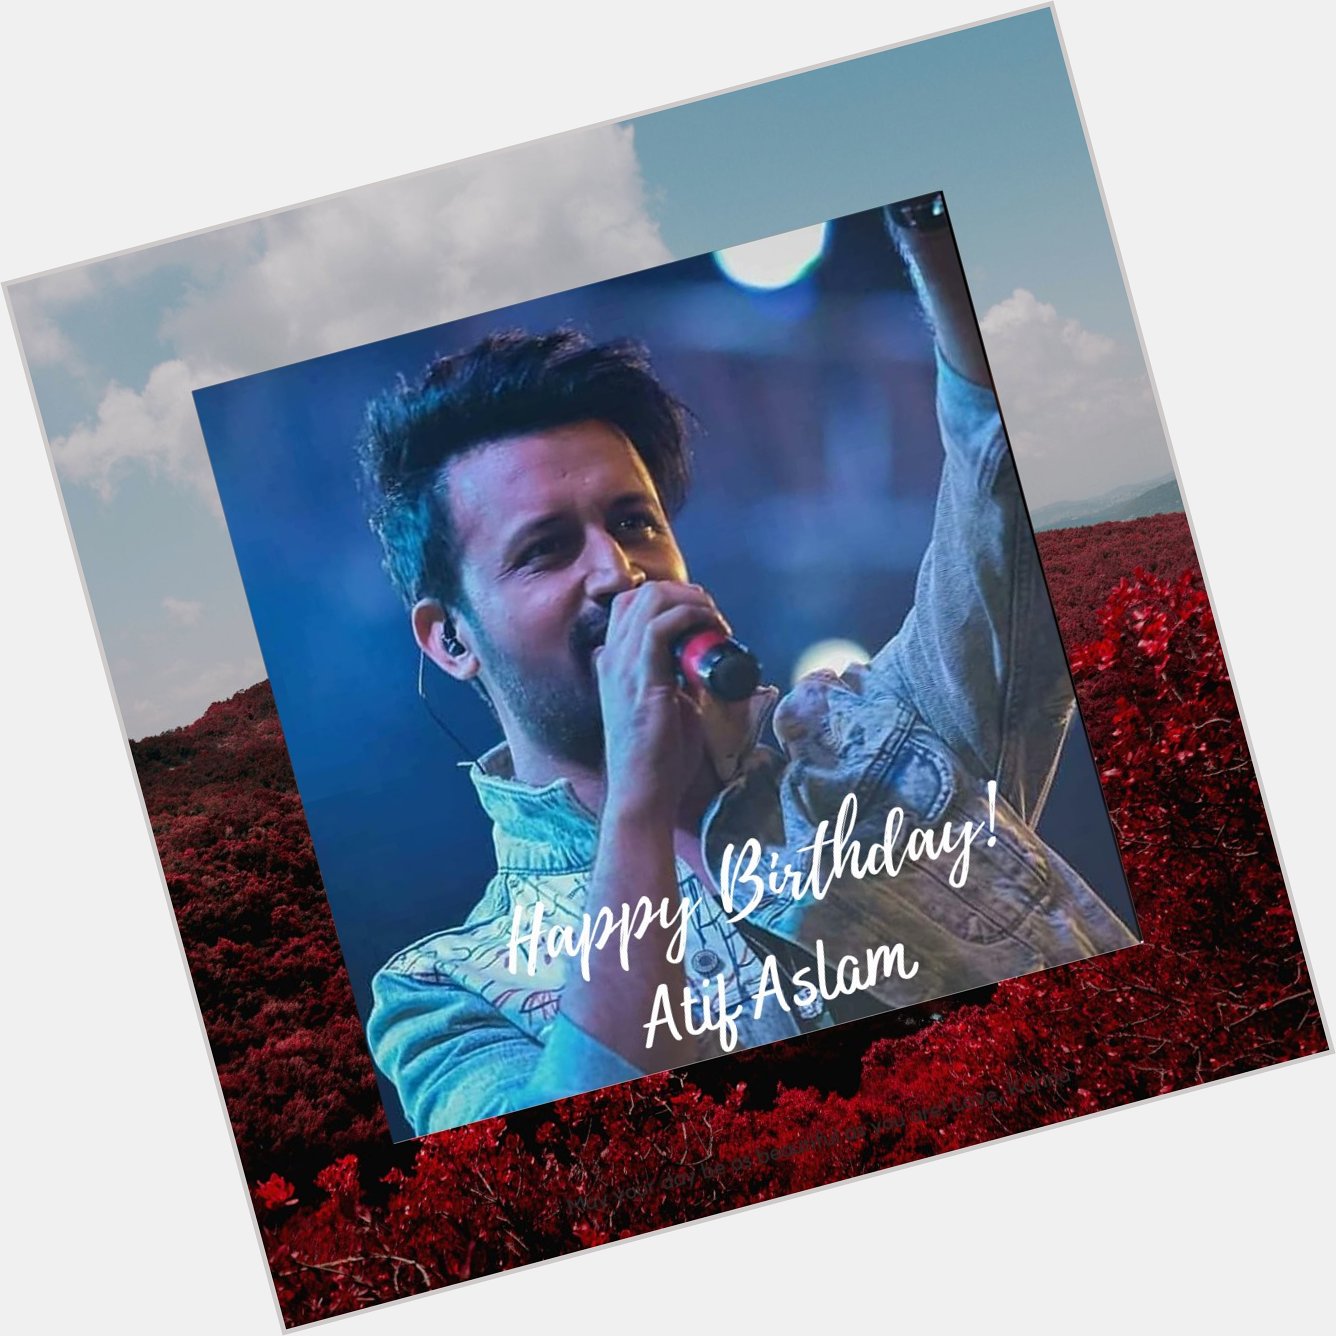 The  singer whose music soothes the soul, Atif Aslam a very Happy Birthday!  